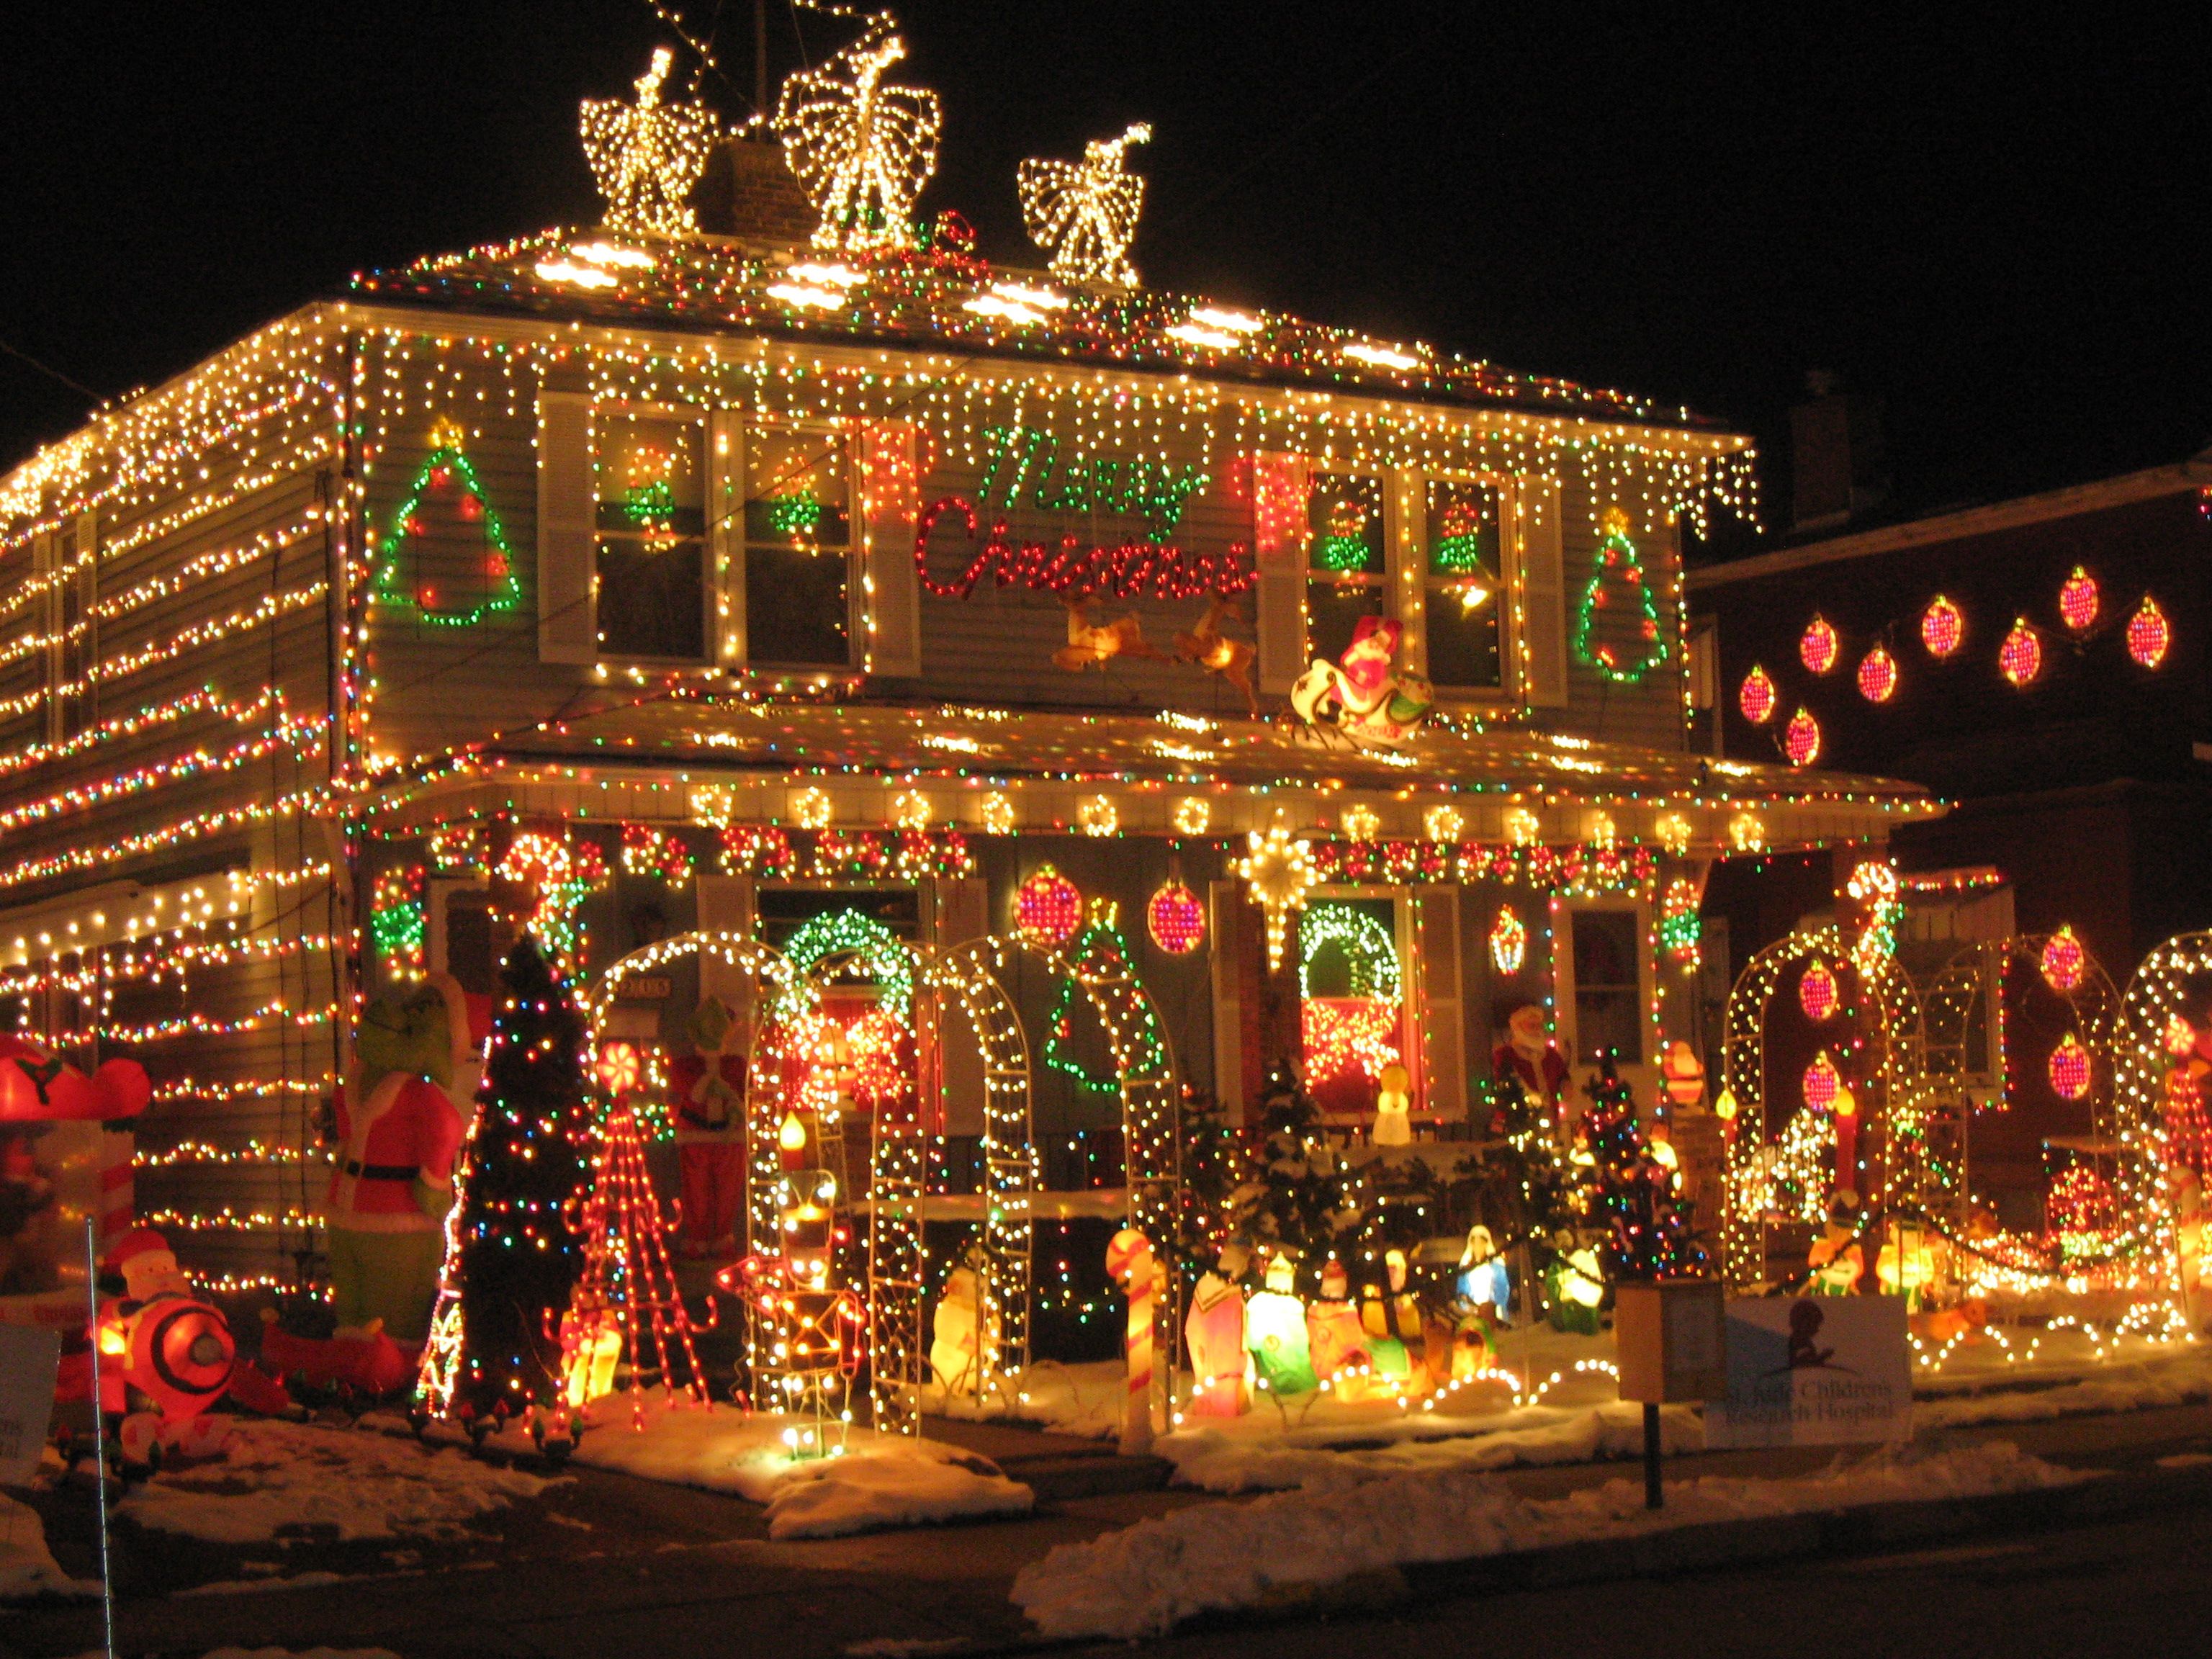 Reminds me of the Griswalds Christmas movie | Christmas house lights